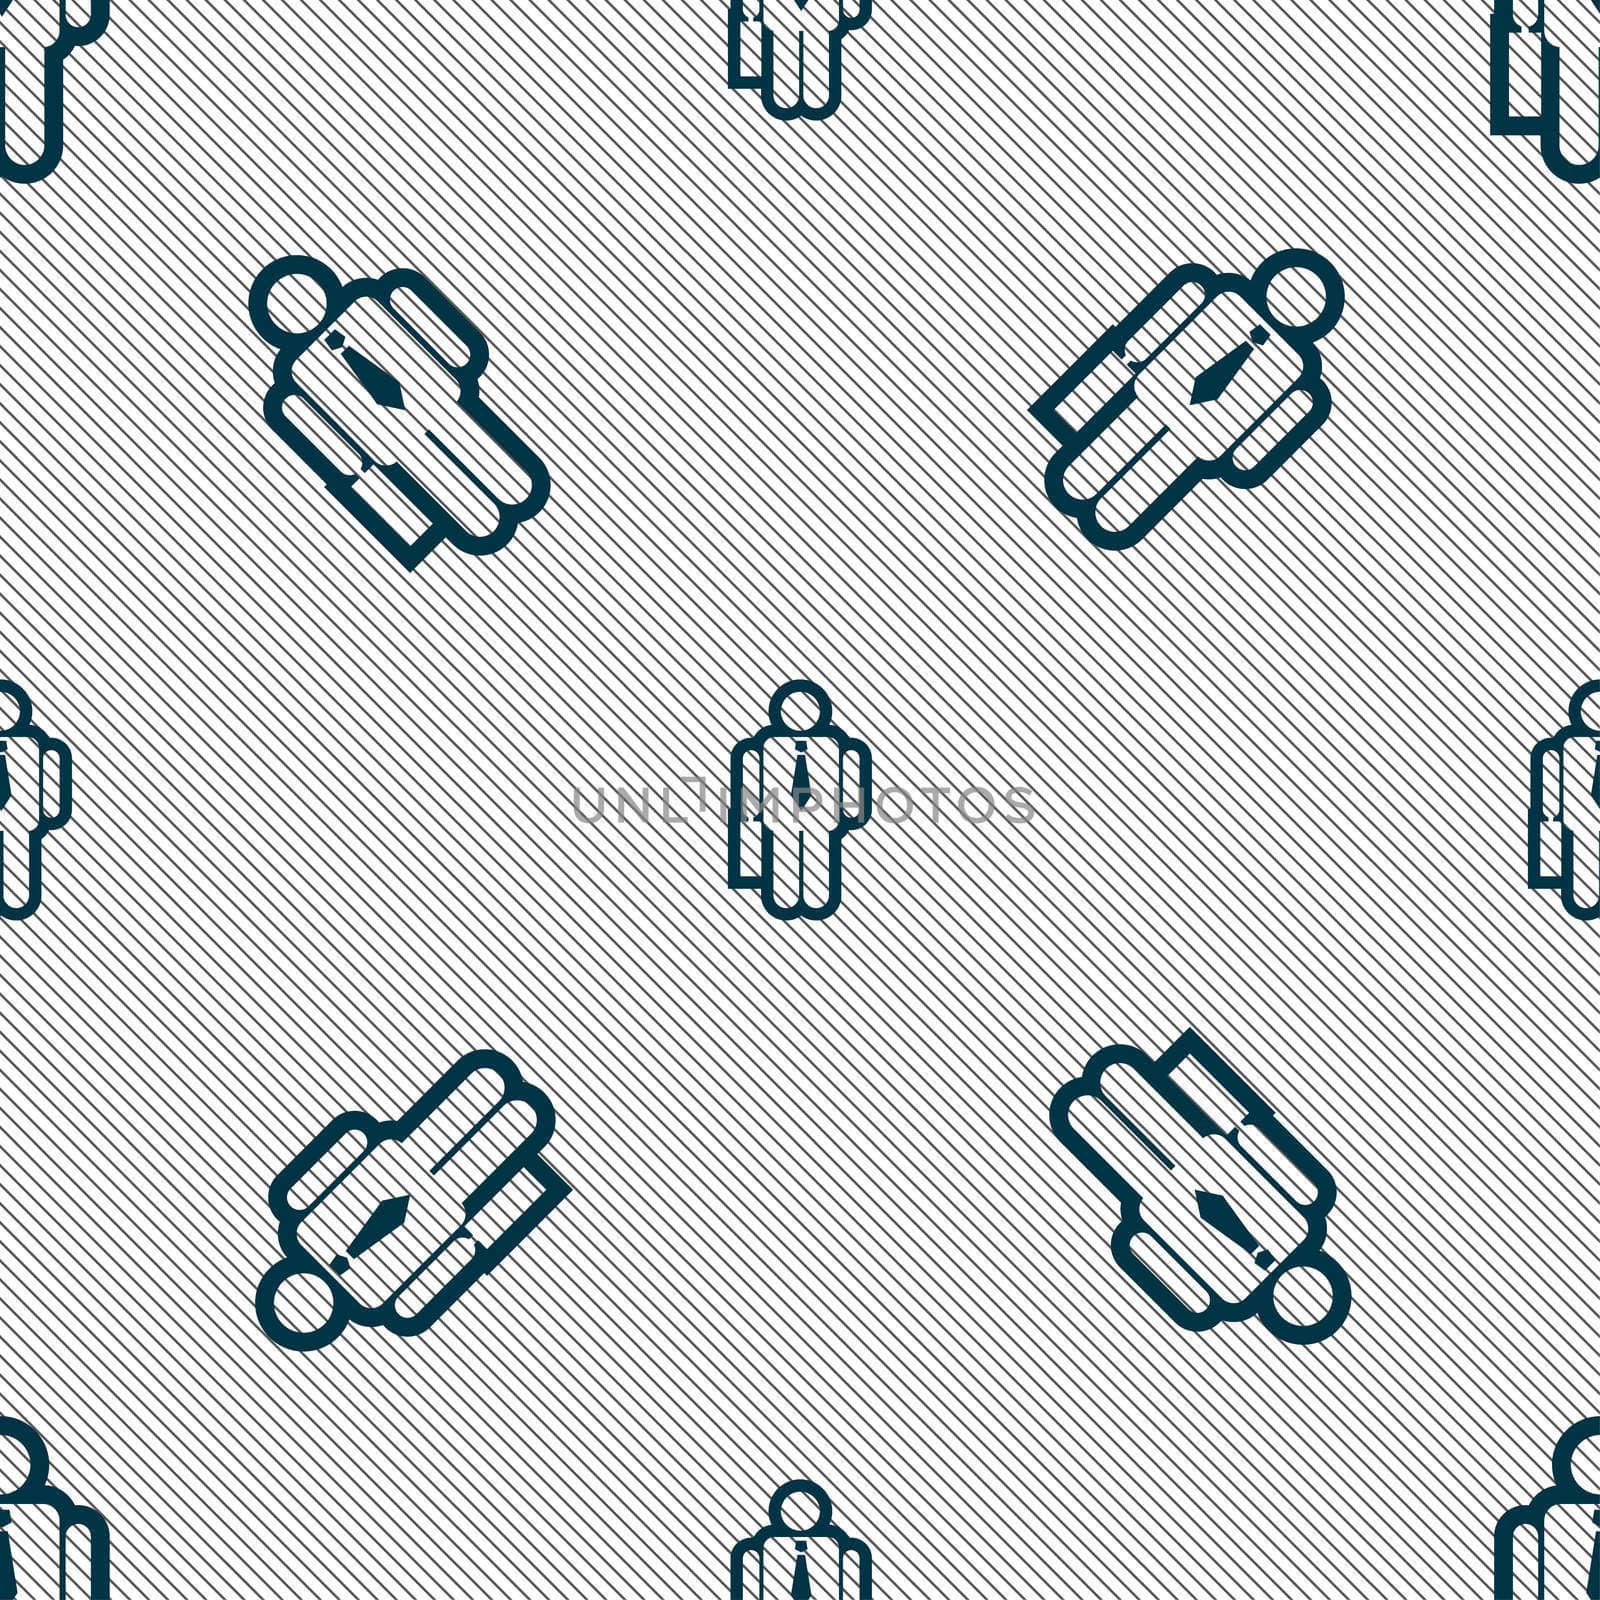 businessman icon sign. Seamless pattern with geometric texture. illustration